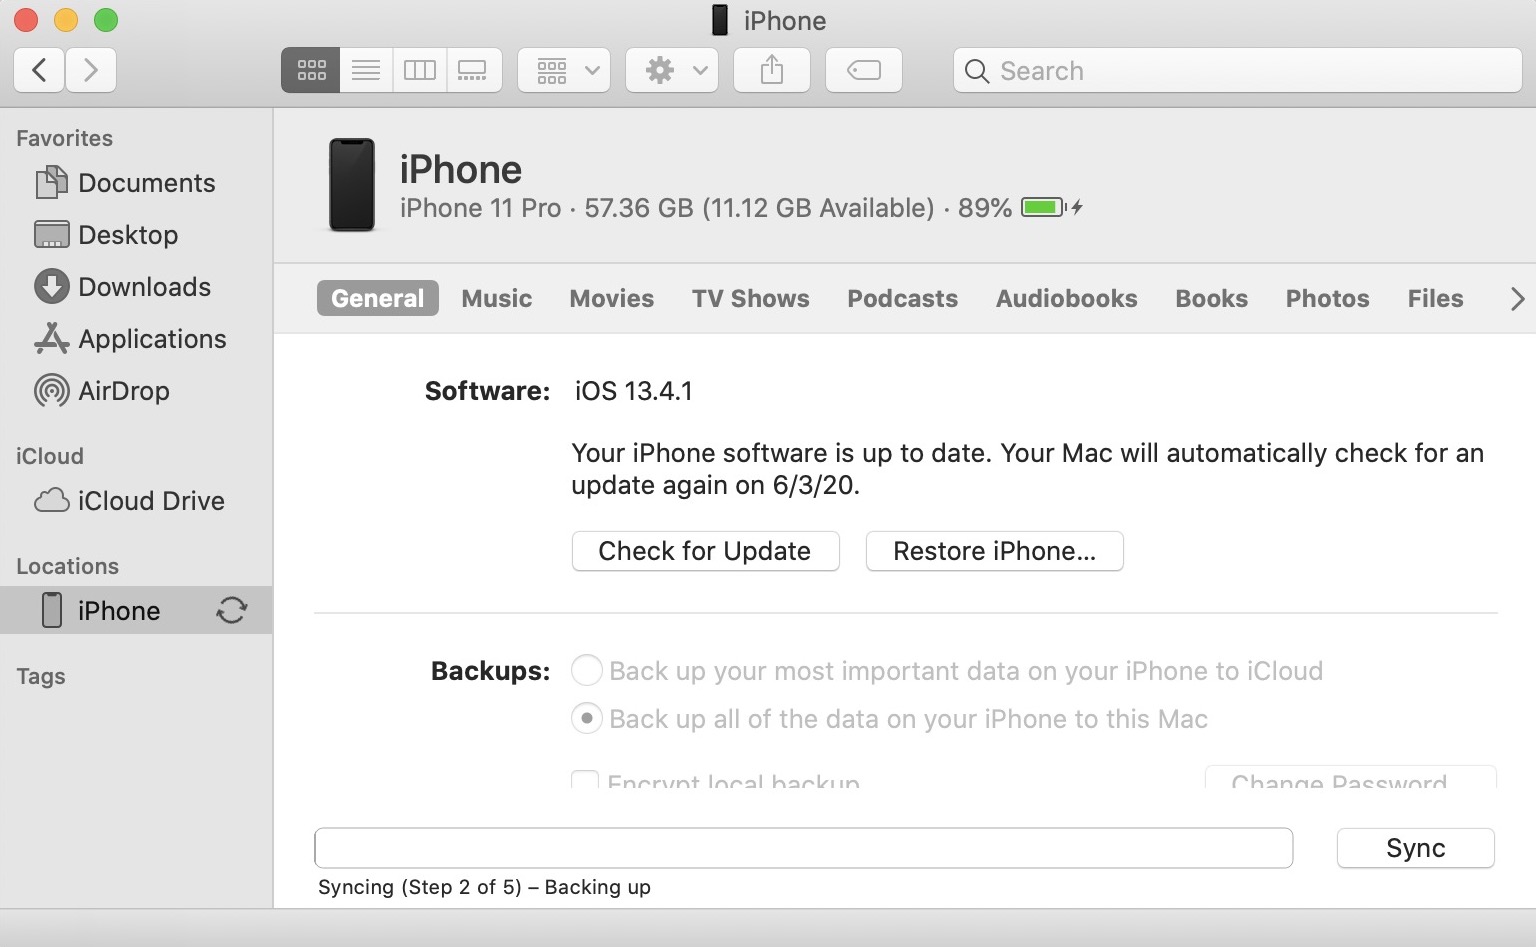 my iphone wont download software update